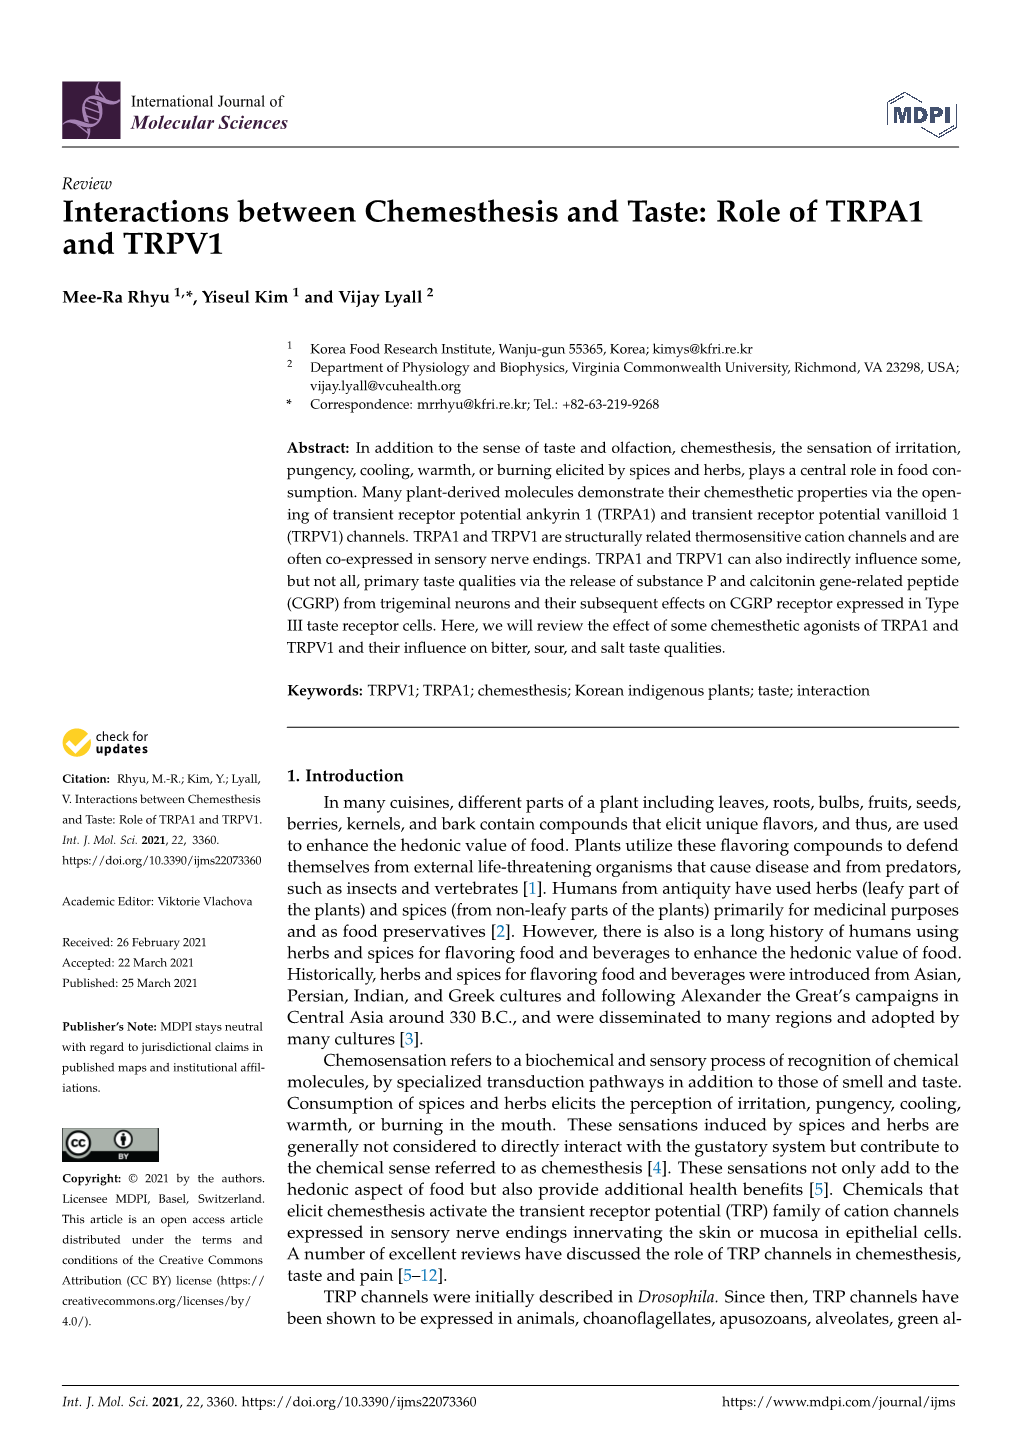 Interactions Between Chemesthesis and Taste: Role of TRPA1 and TRPV1